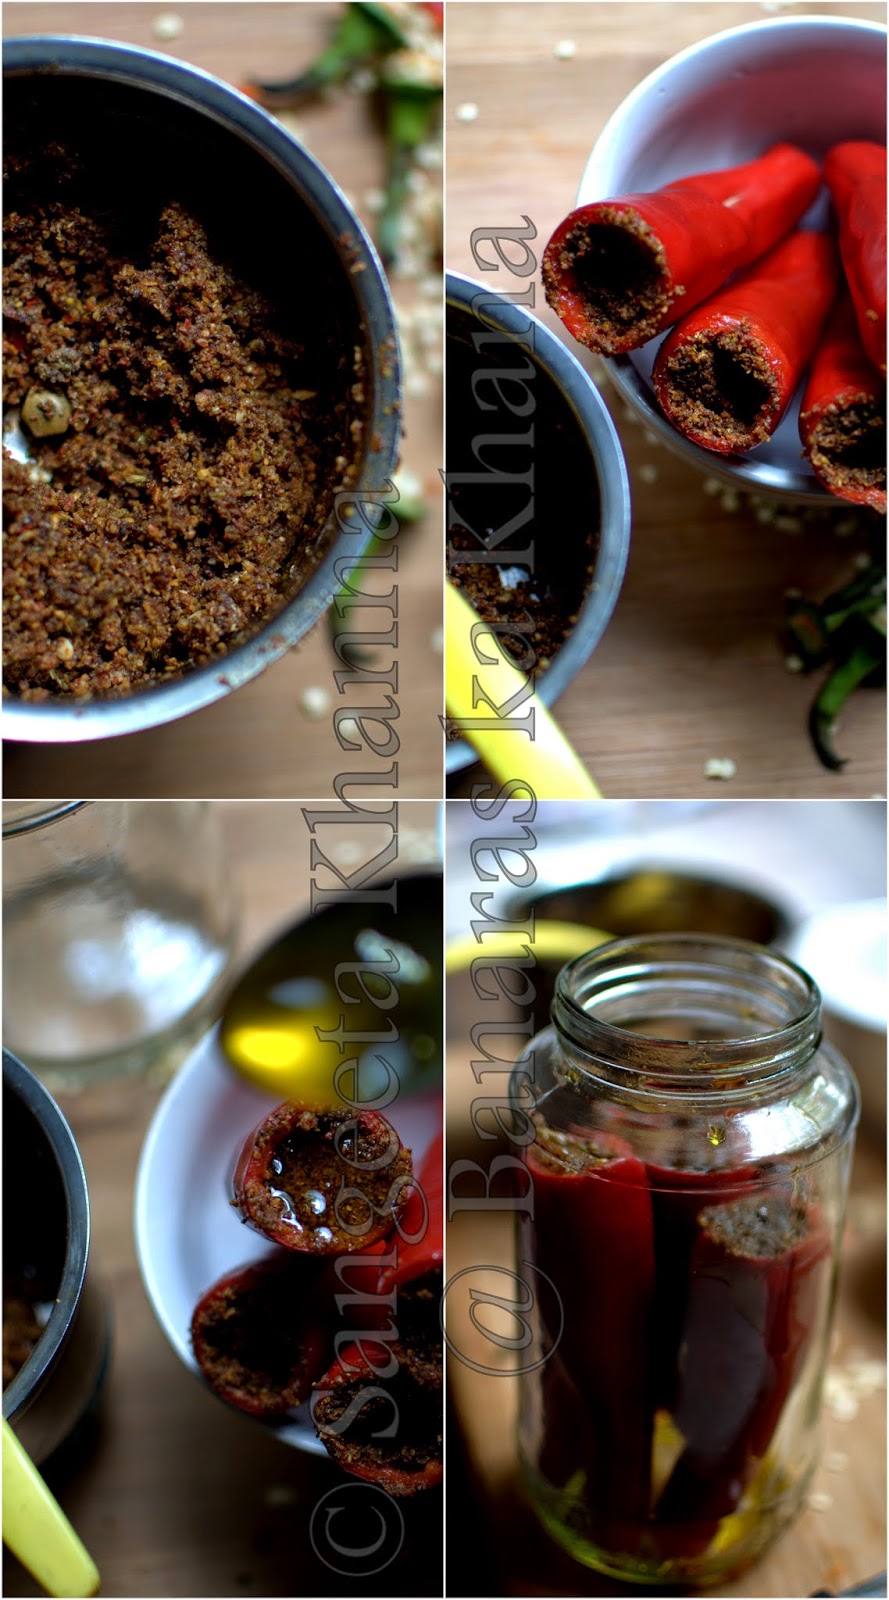 preparing spices and stuffing the red peppers for bharva mirch ka achar